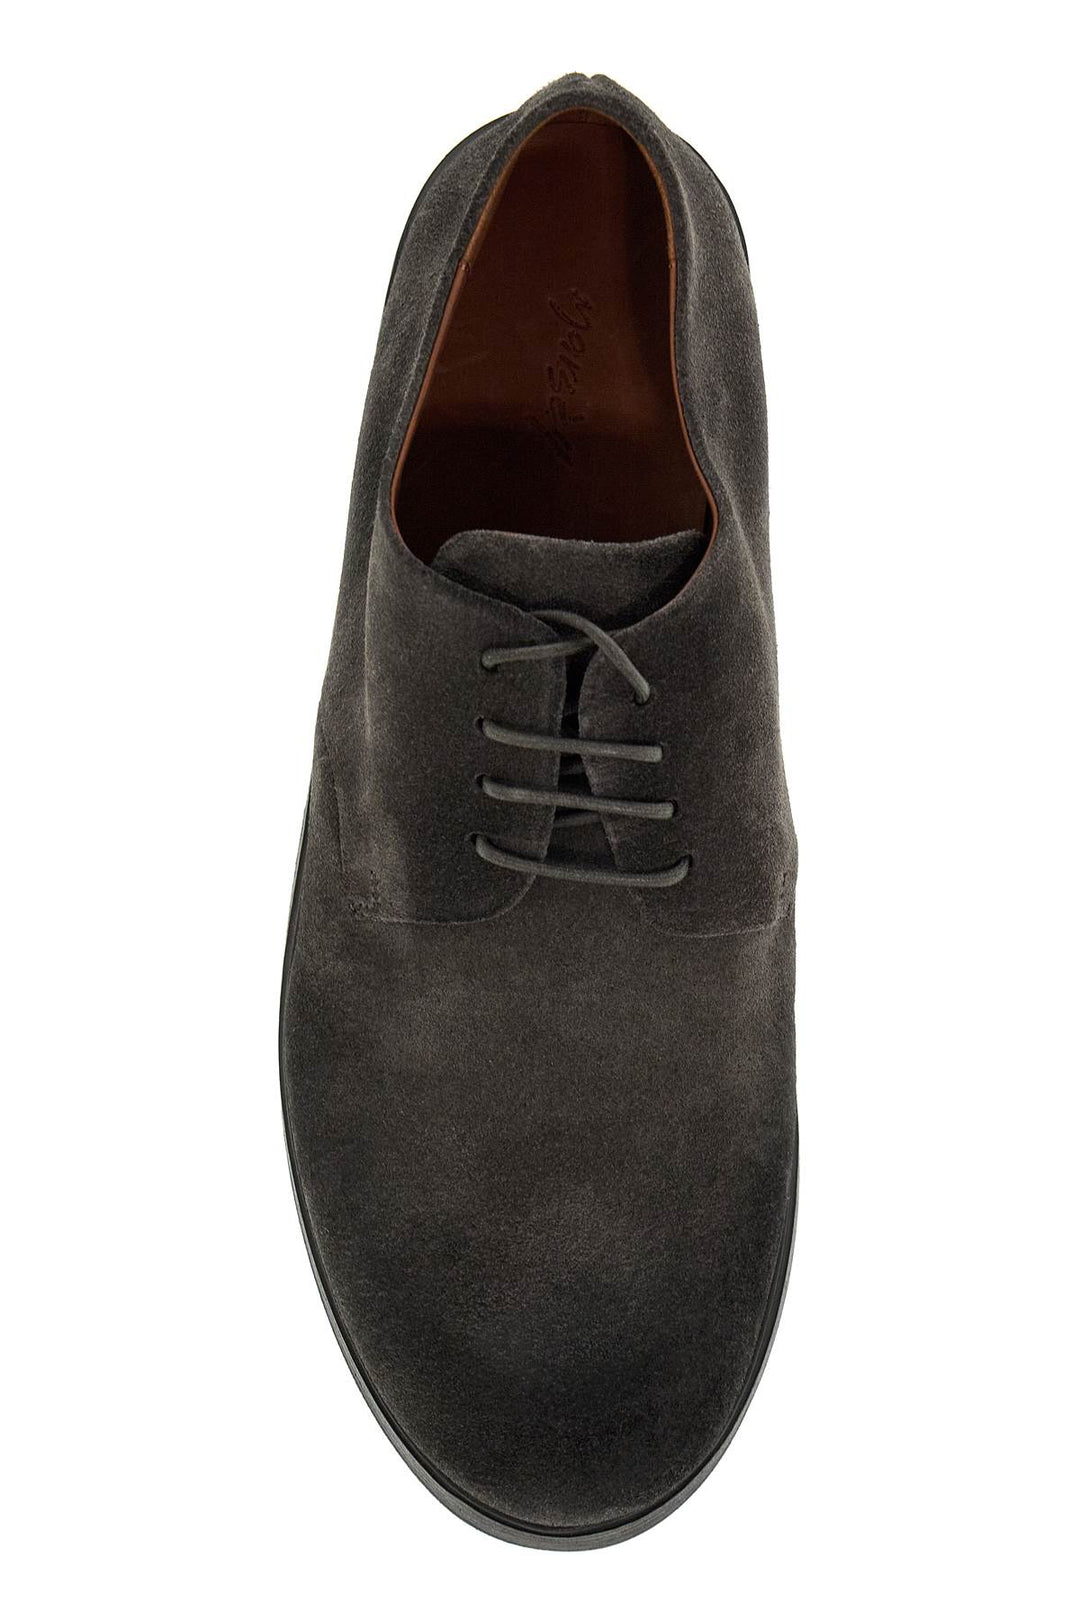 Marsell Suede Pumpkin Wedge Lace Up Shoes   Grey